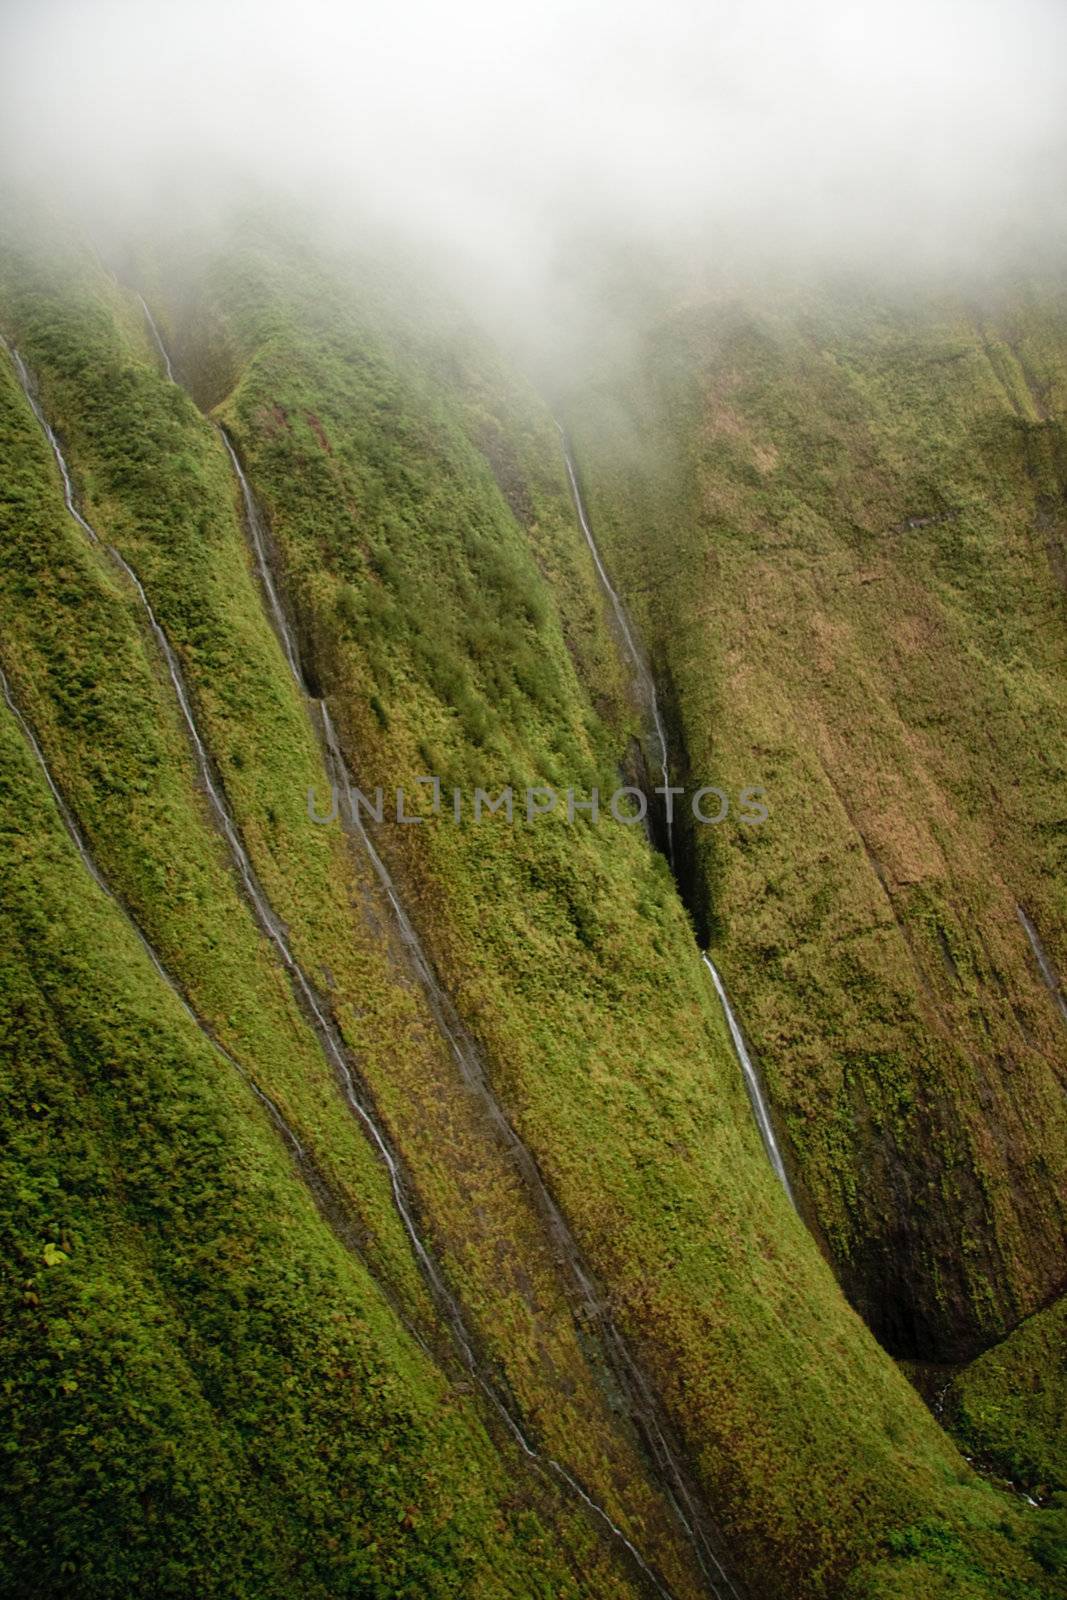 Several waterfalls streaming down the rock face in Kauai